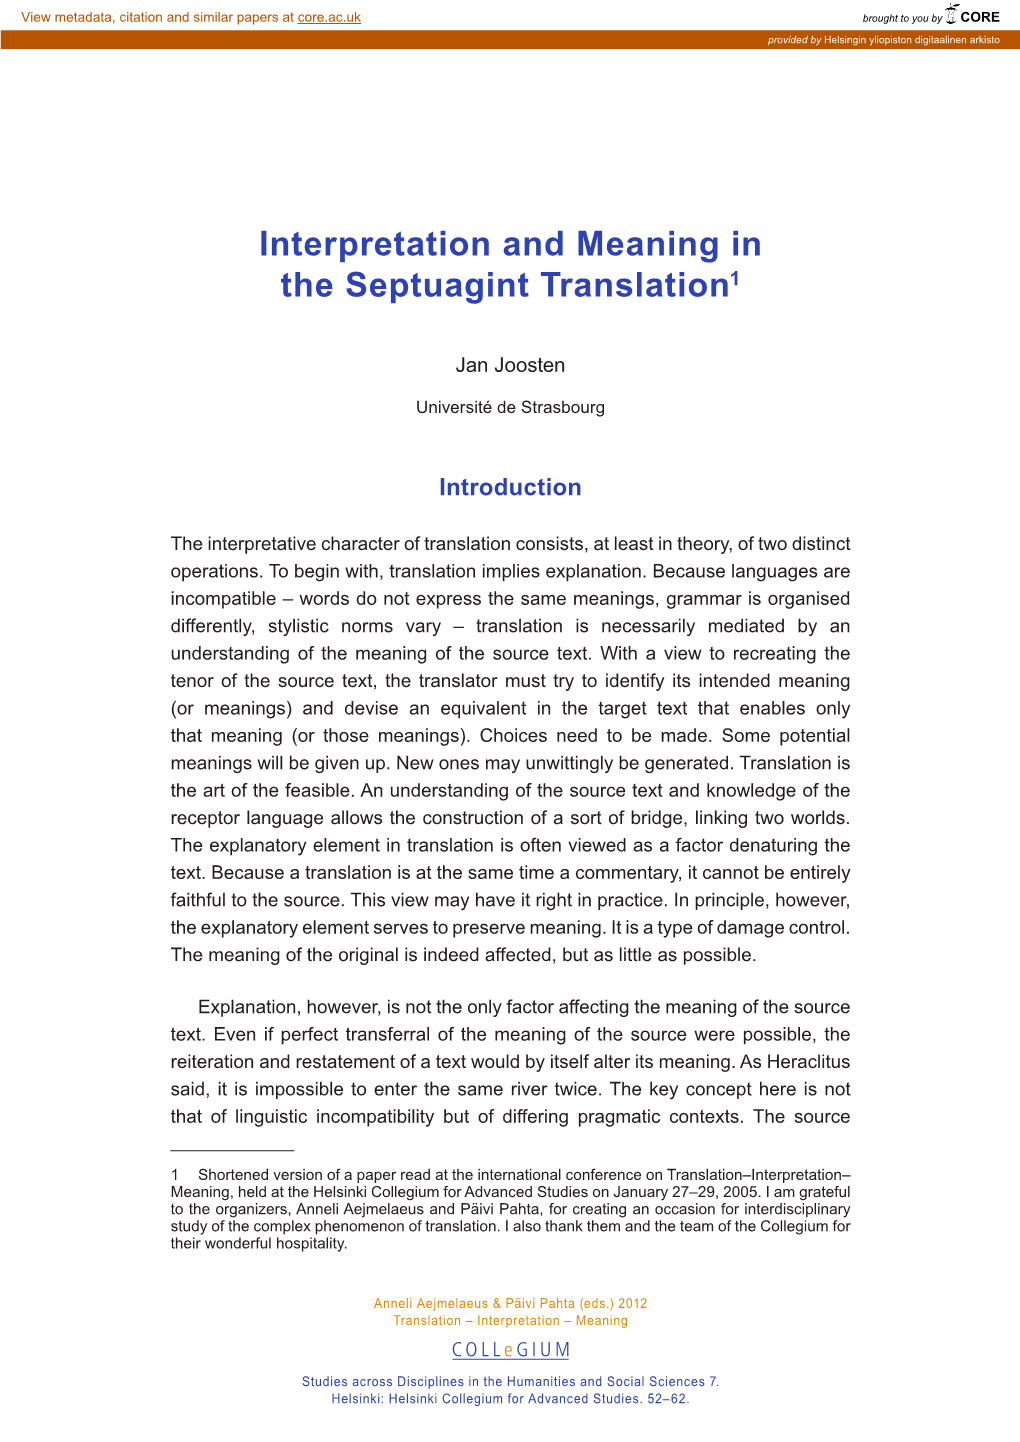 Interpretation and Meaning in the Septuagint Translation1